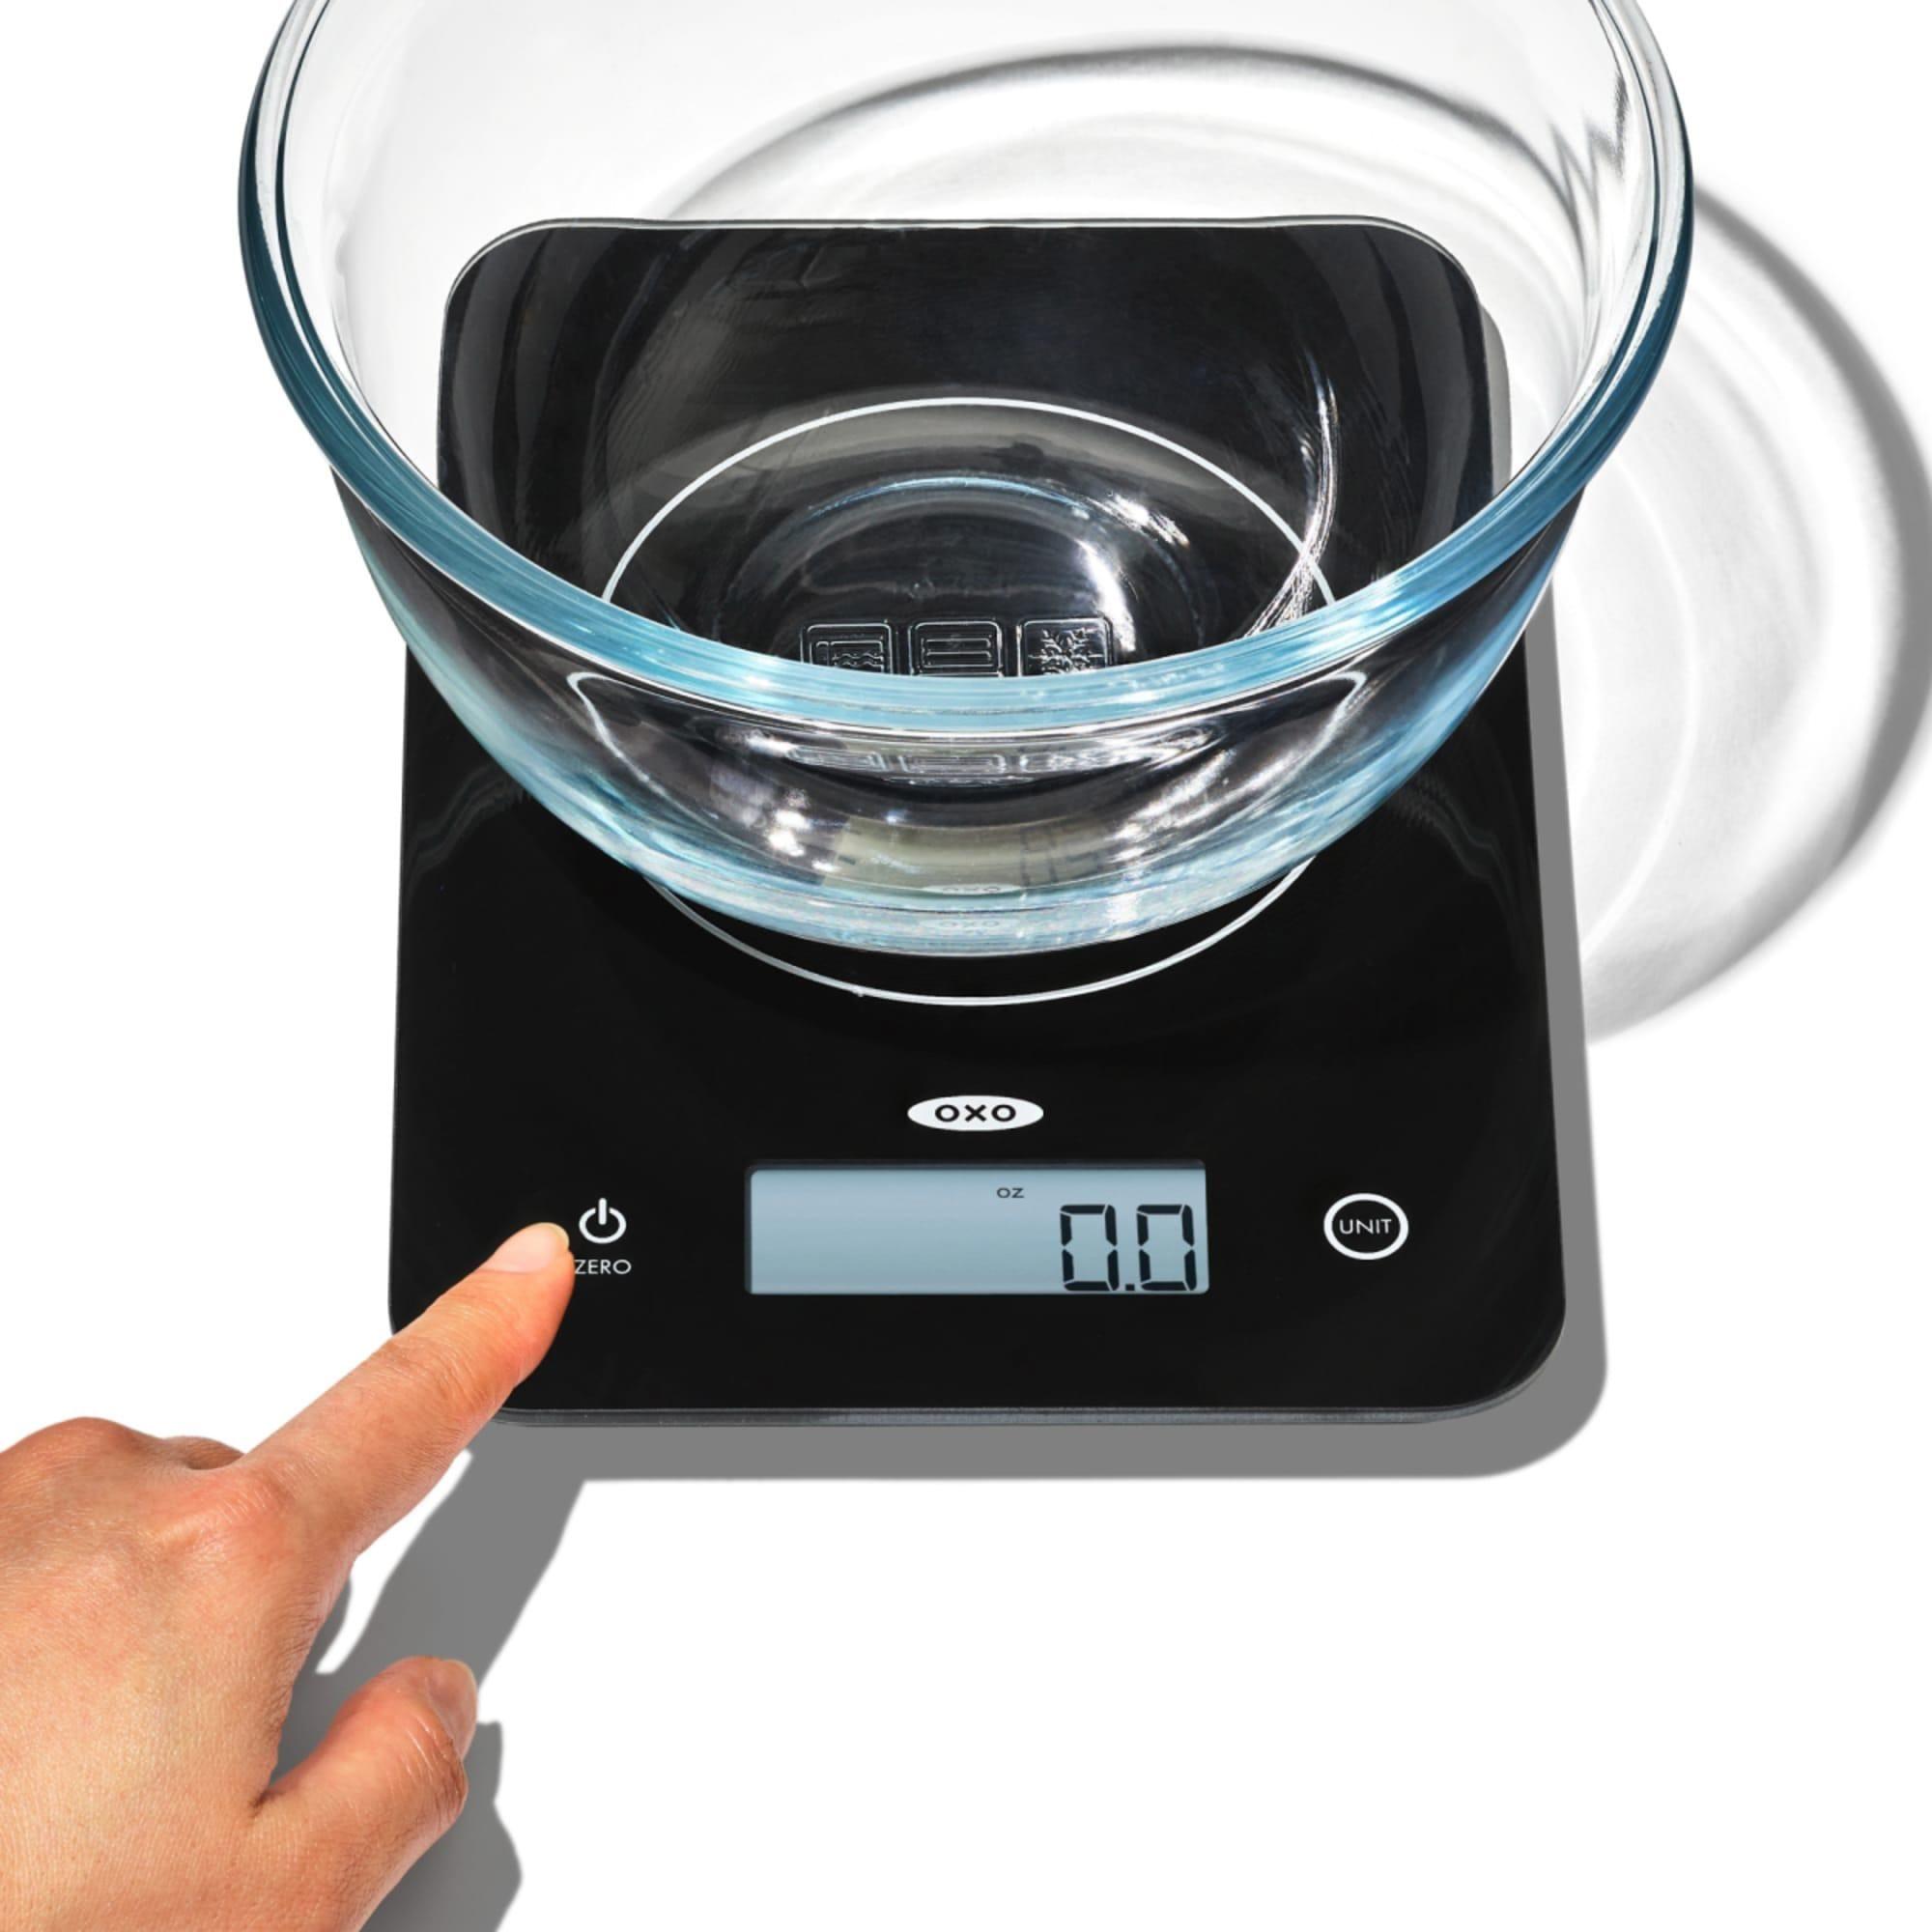 OXO Good Grips Everyday Glass Food Scale Image 3